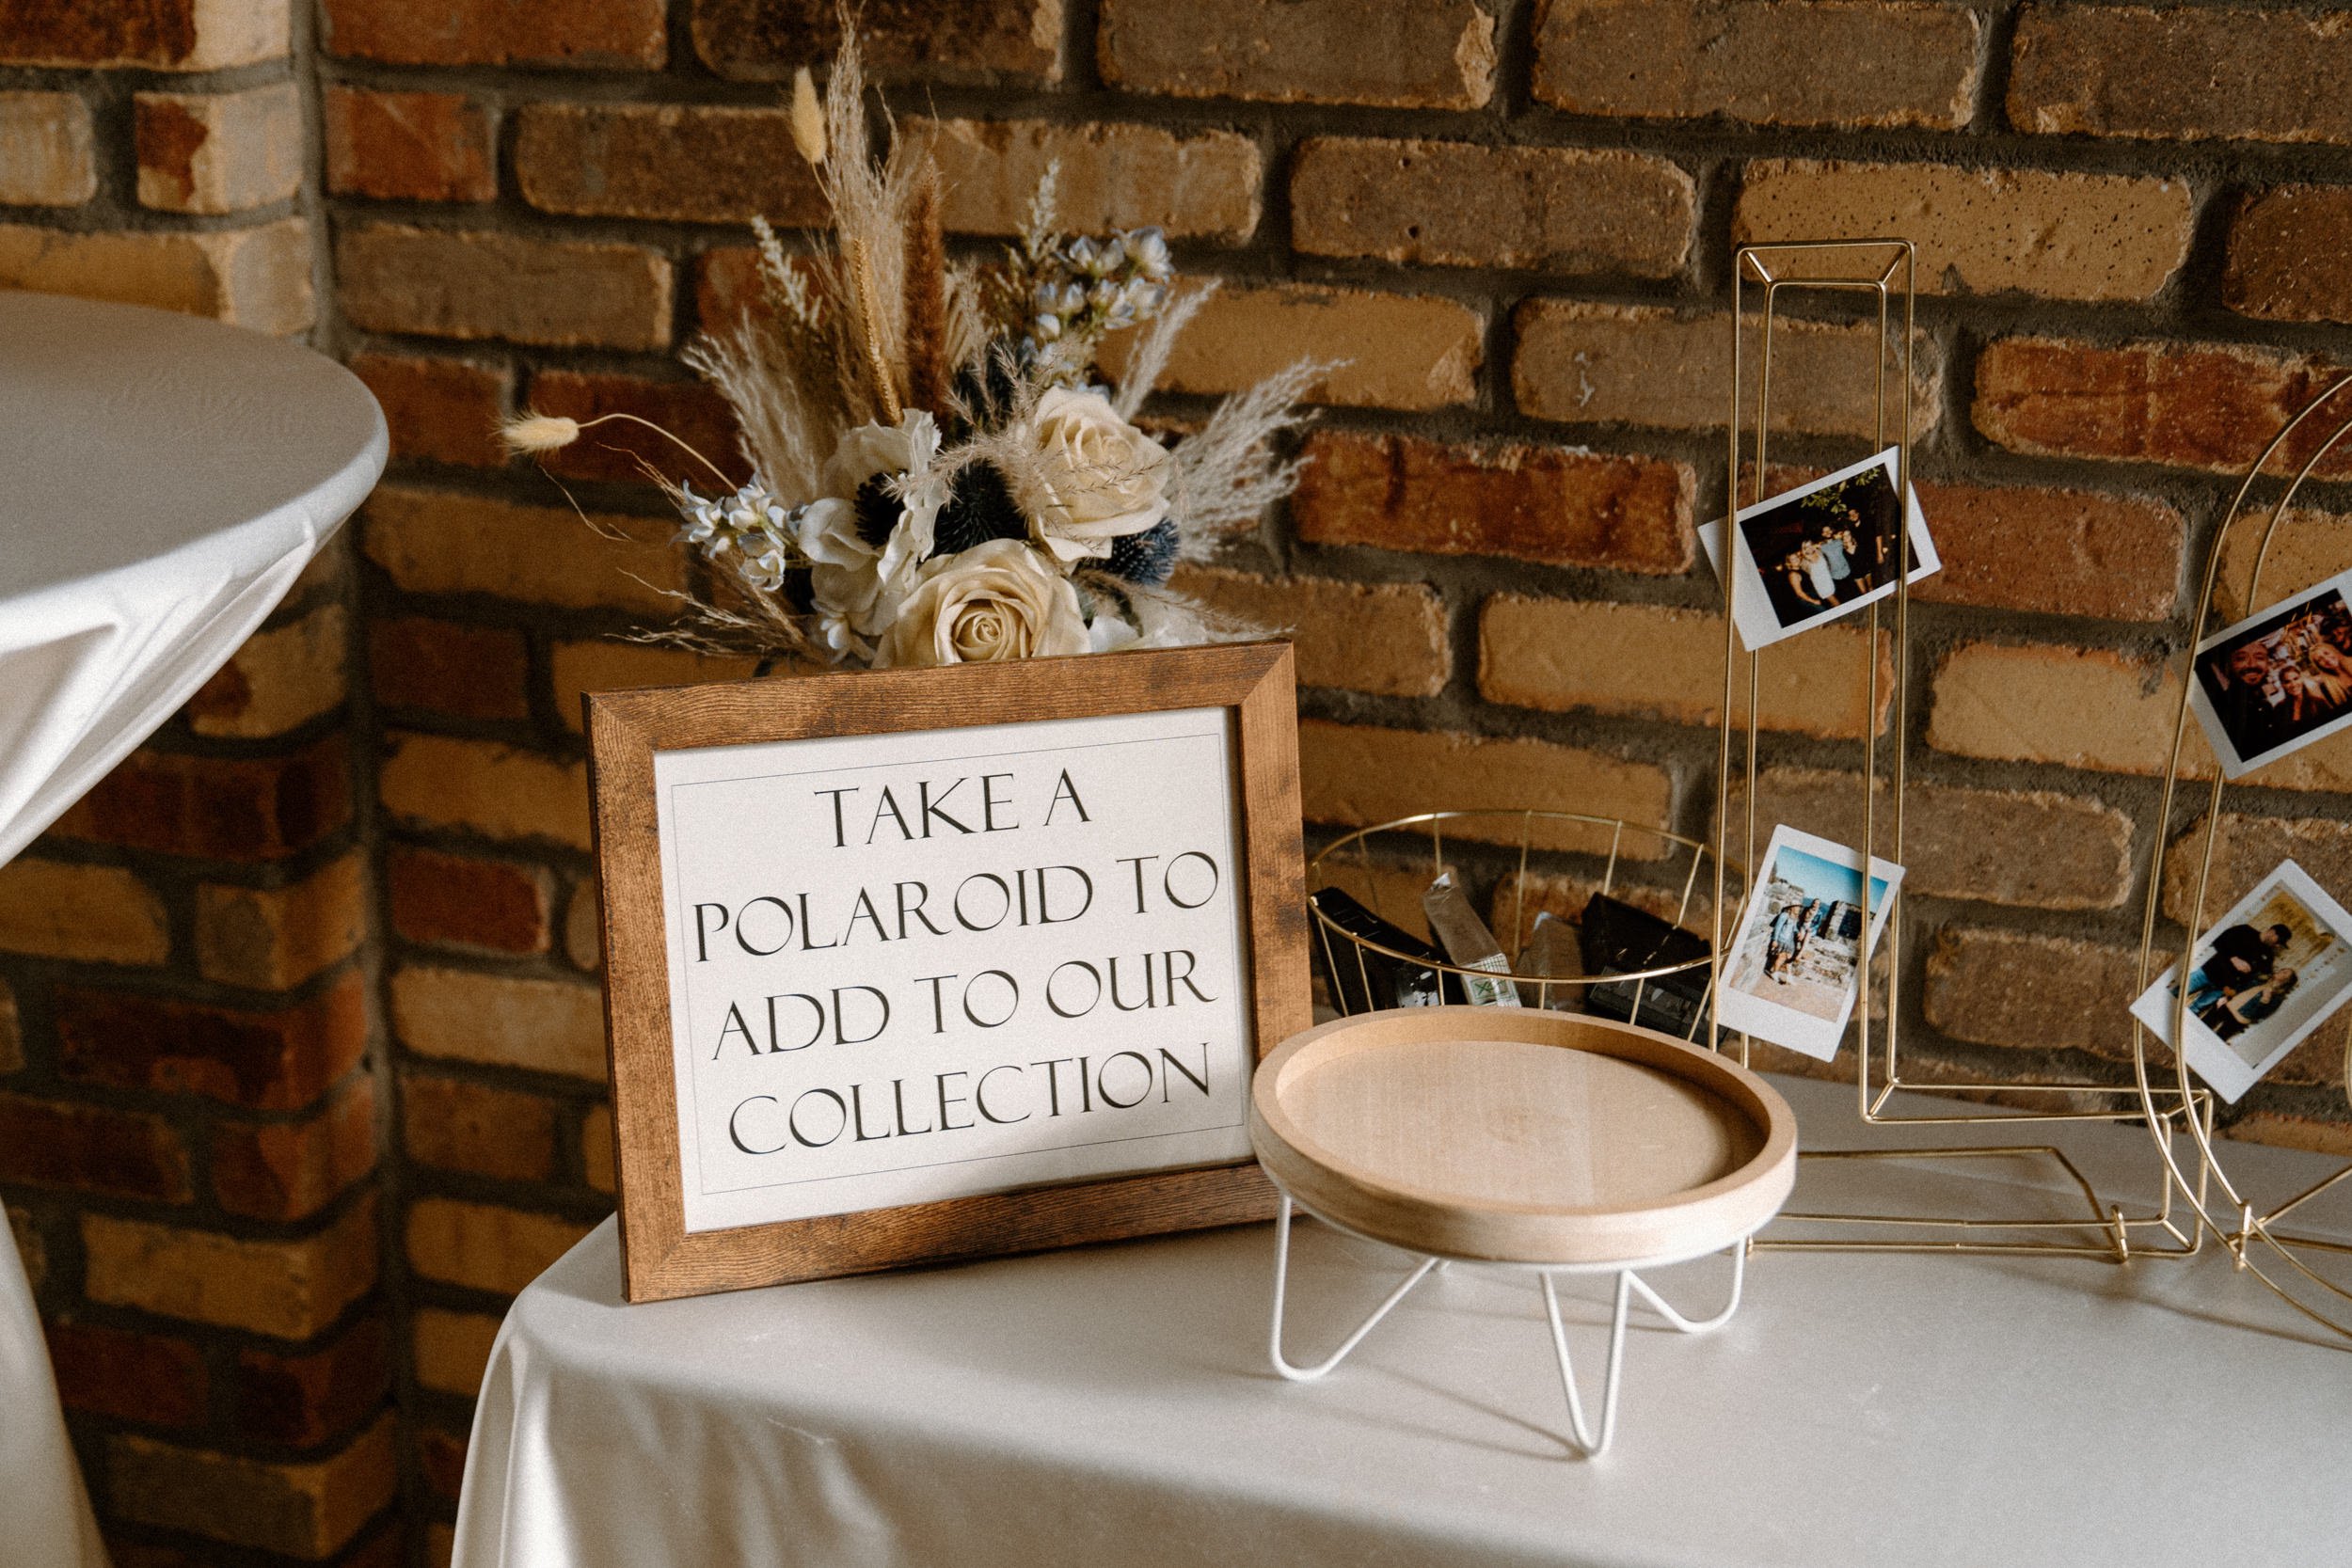 A basket of polaroid cameras and a sign that reads "Take a polaroid to add to our collection"